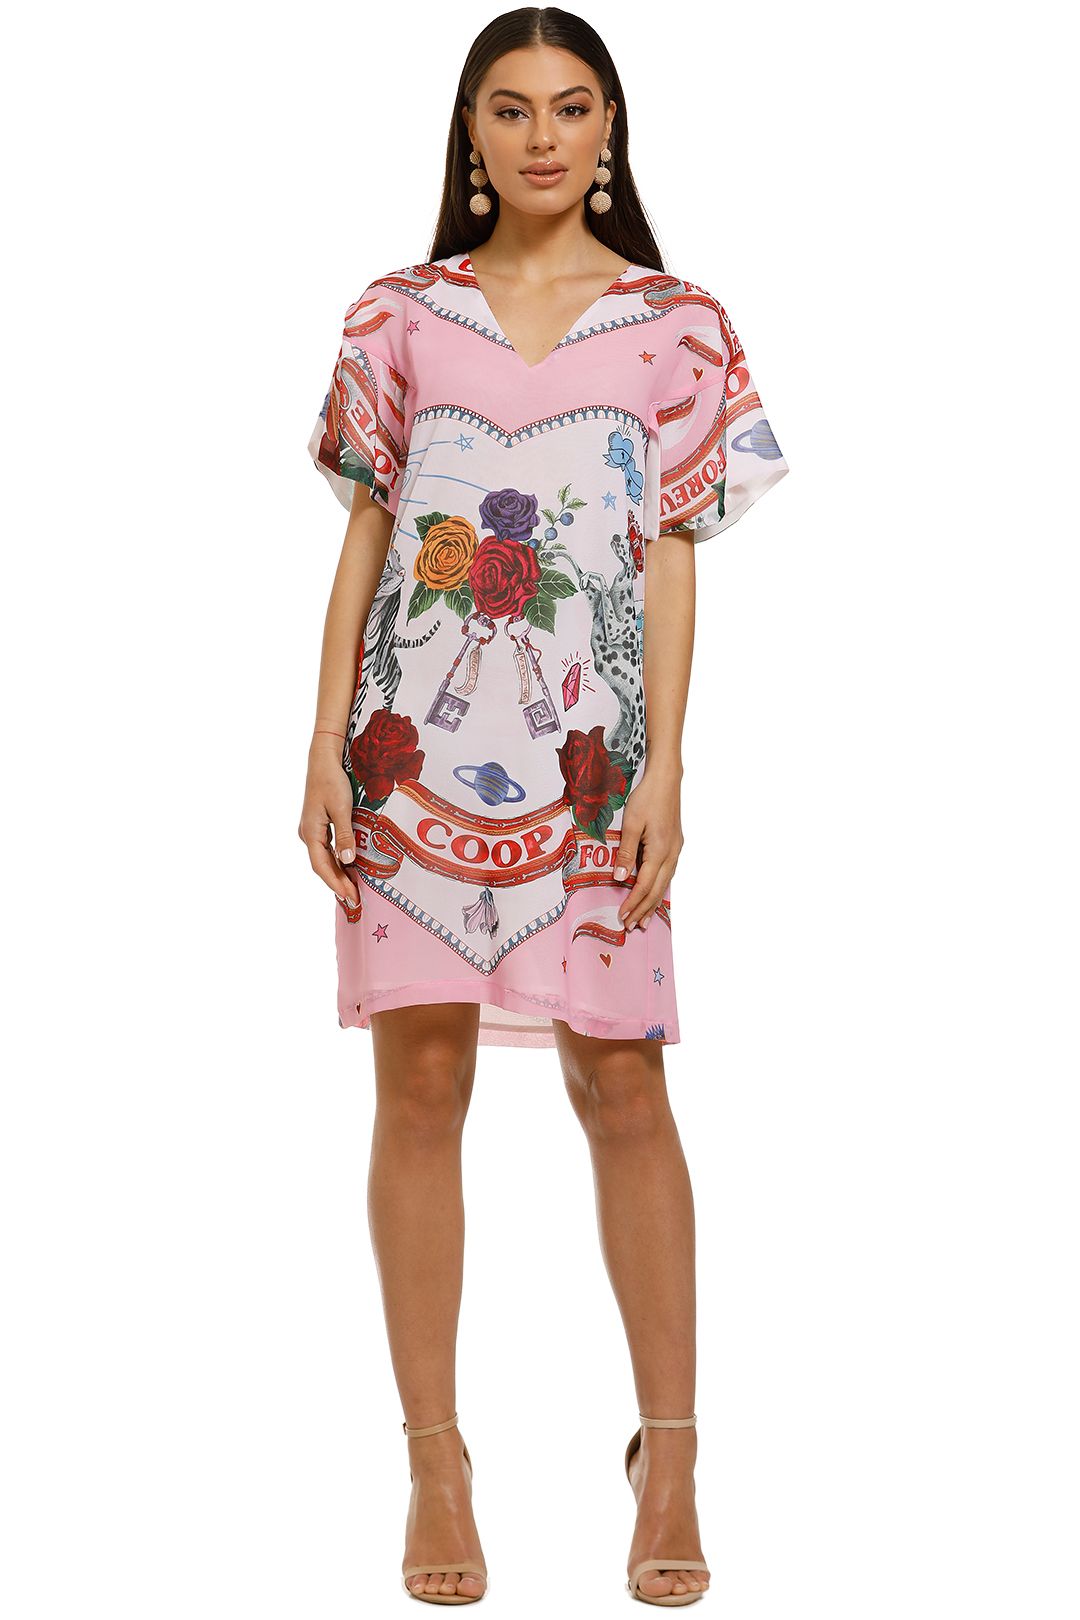 Coop-by-Trelise-Cooper-Shift-Off-Dress-Pink-Print-Front